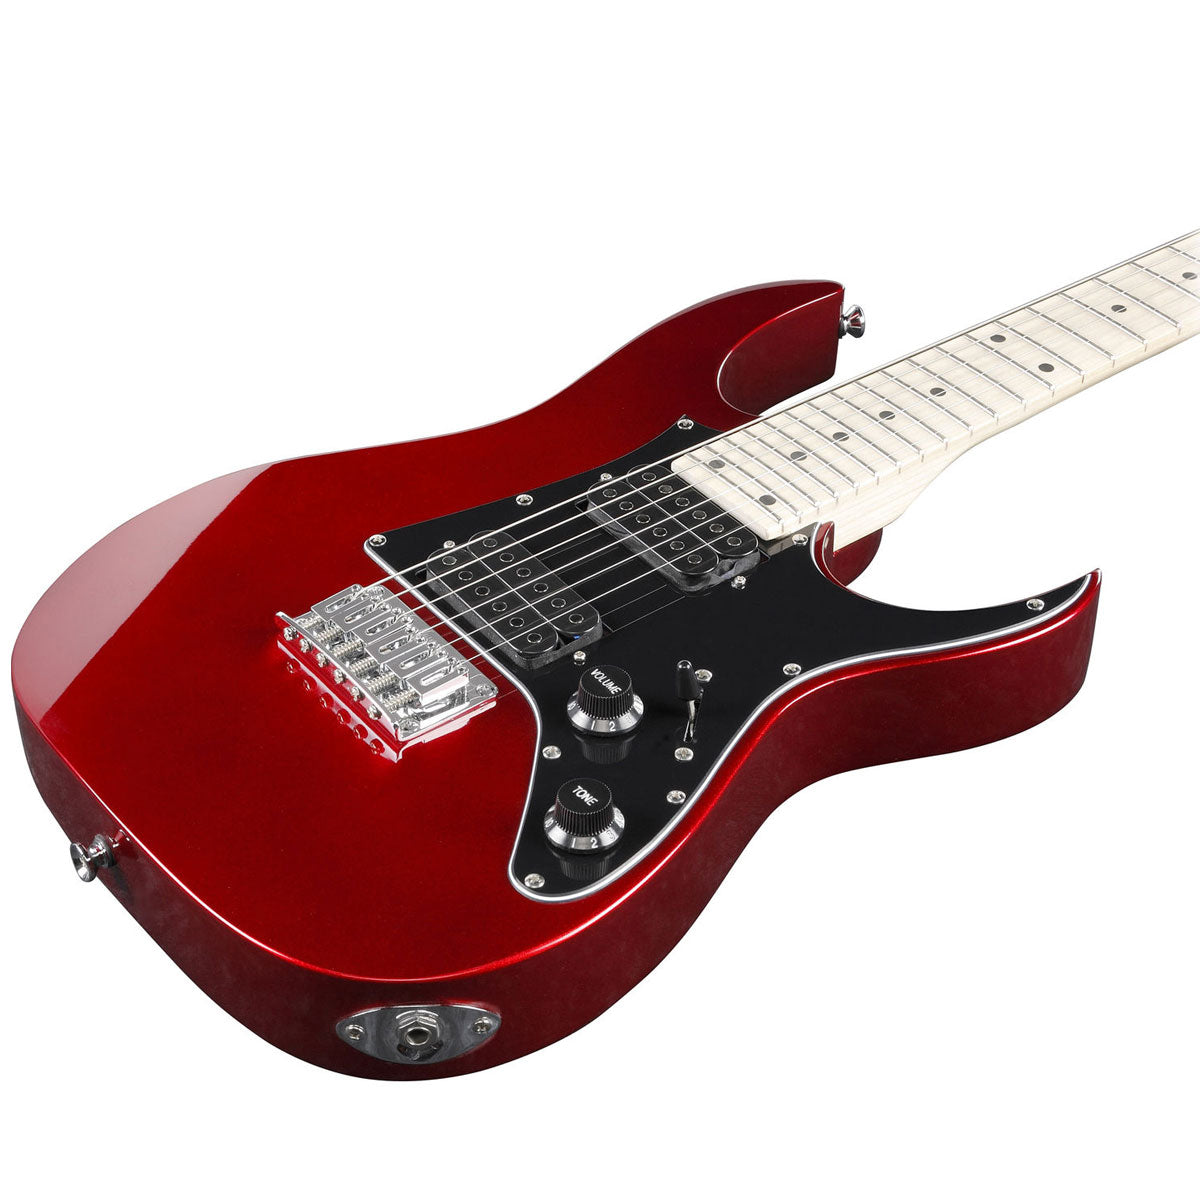 Ibanez GRGM21M Mikro Electric Guitar - Candy Apple Red